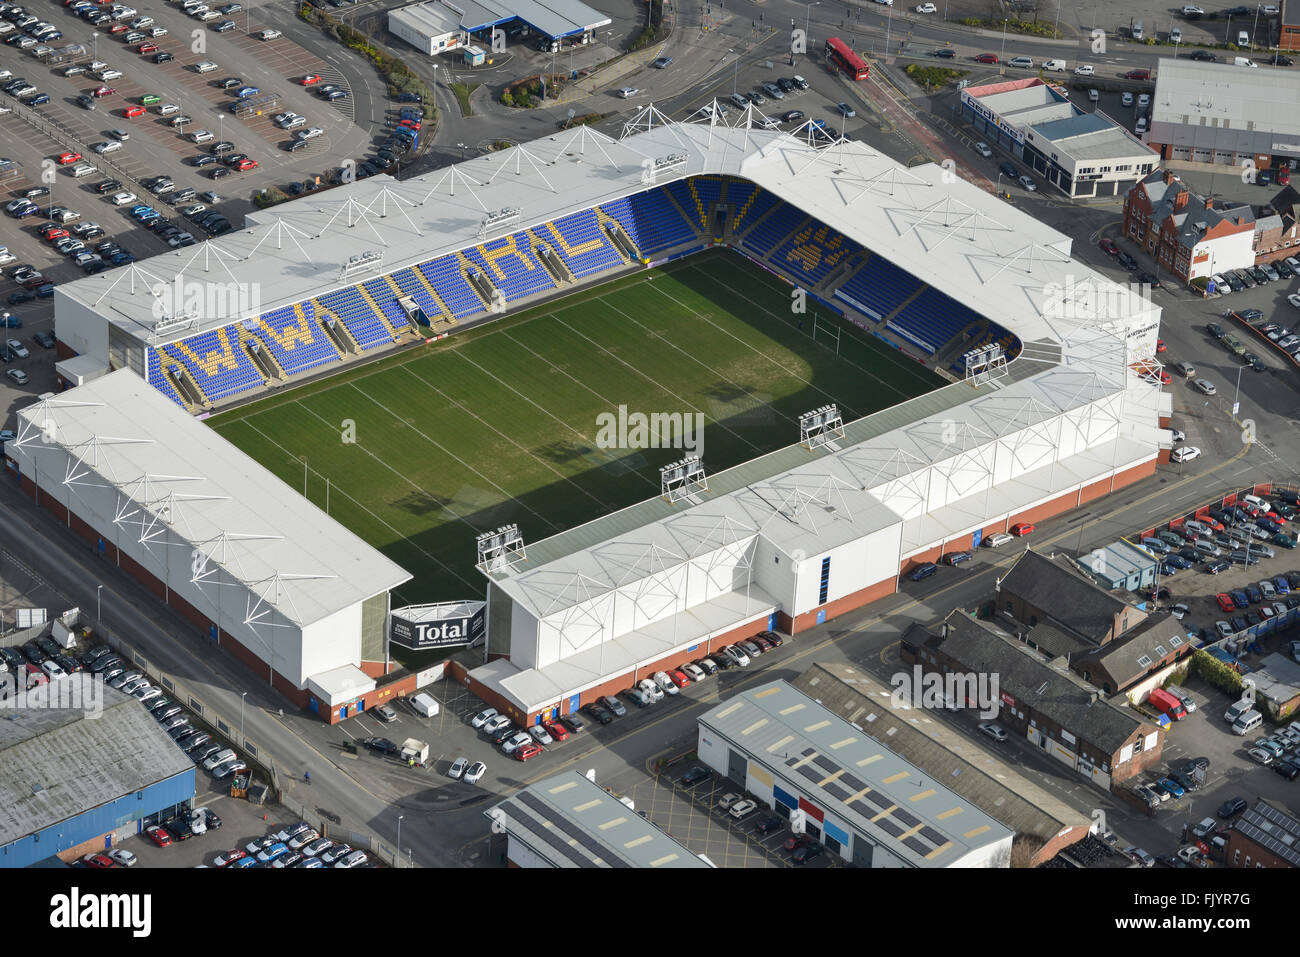 An aerial view of the Halliwell Jones Stadium, home of Warrington Wolves Rugby League FC Stock Photo